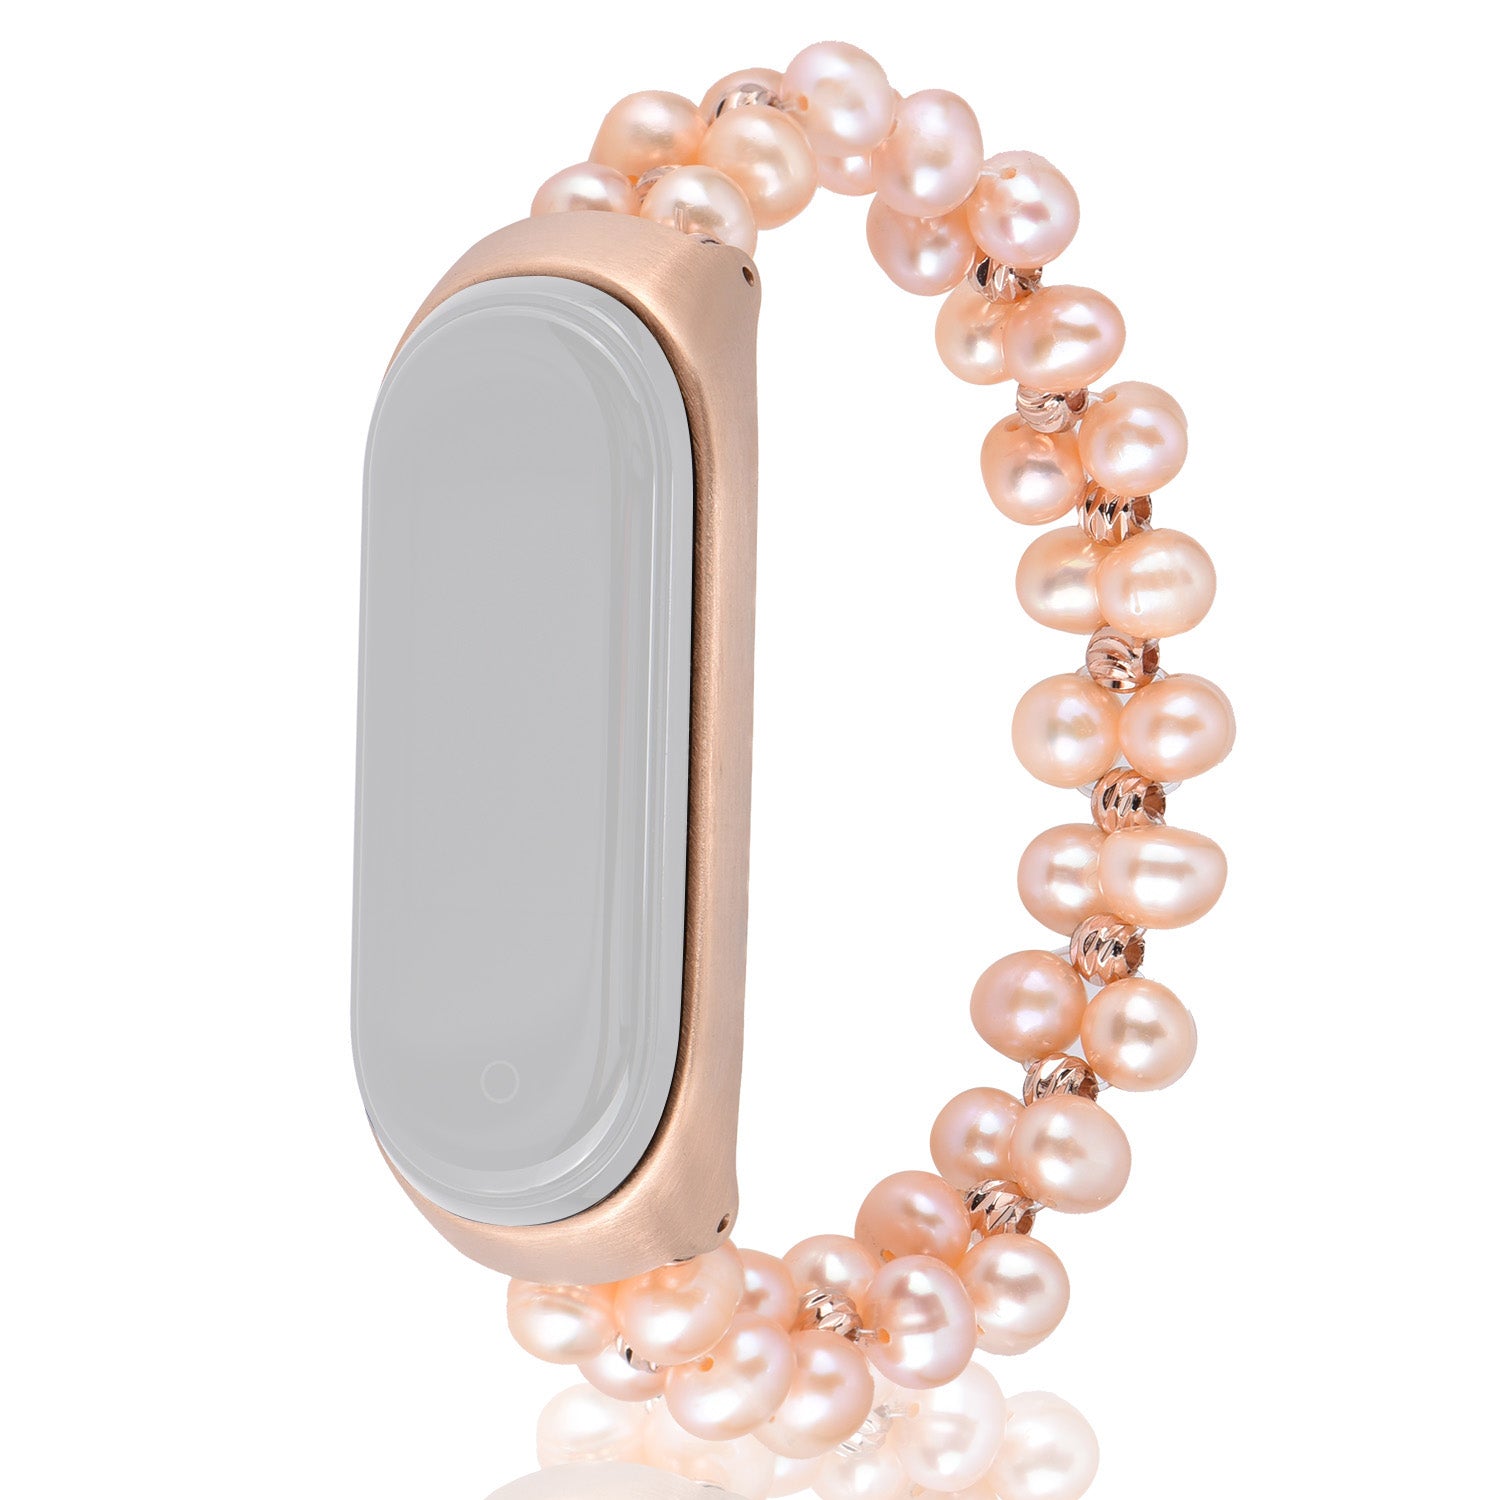 For Xiaomi Mi Band 5/6 Pearls Bracelet Smart Watch Band Replacement Wrist Strap - Pink